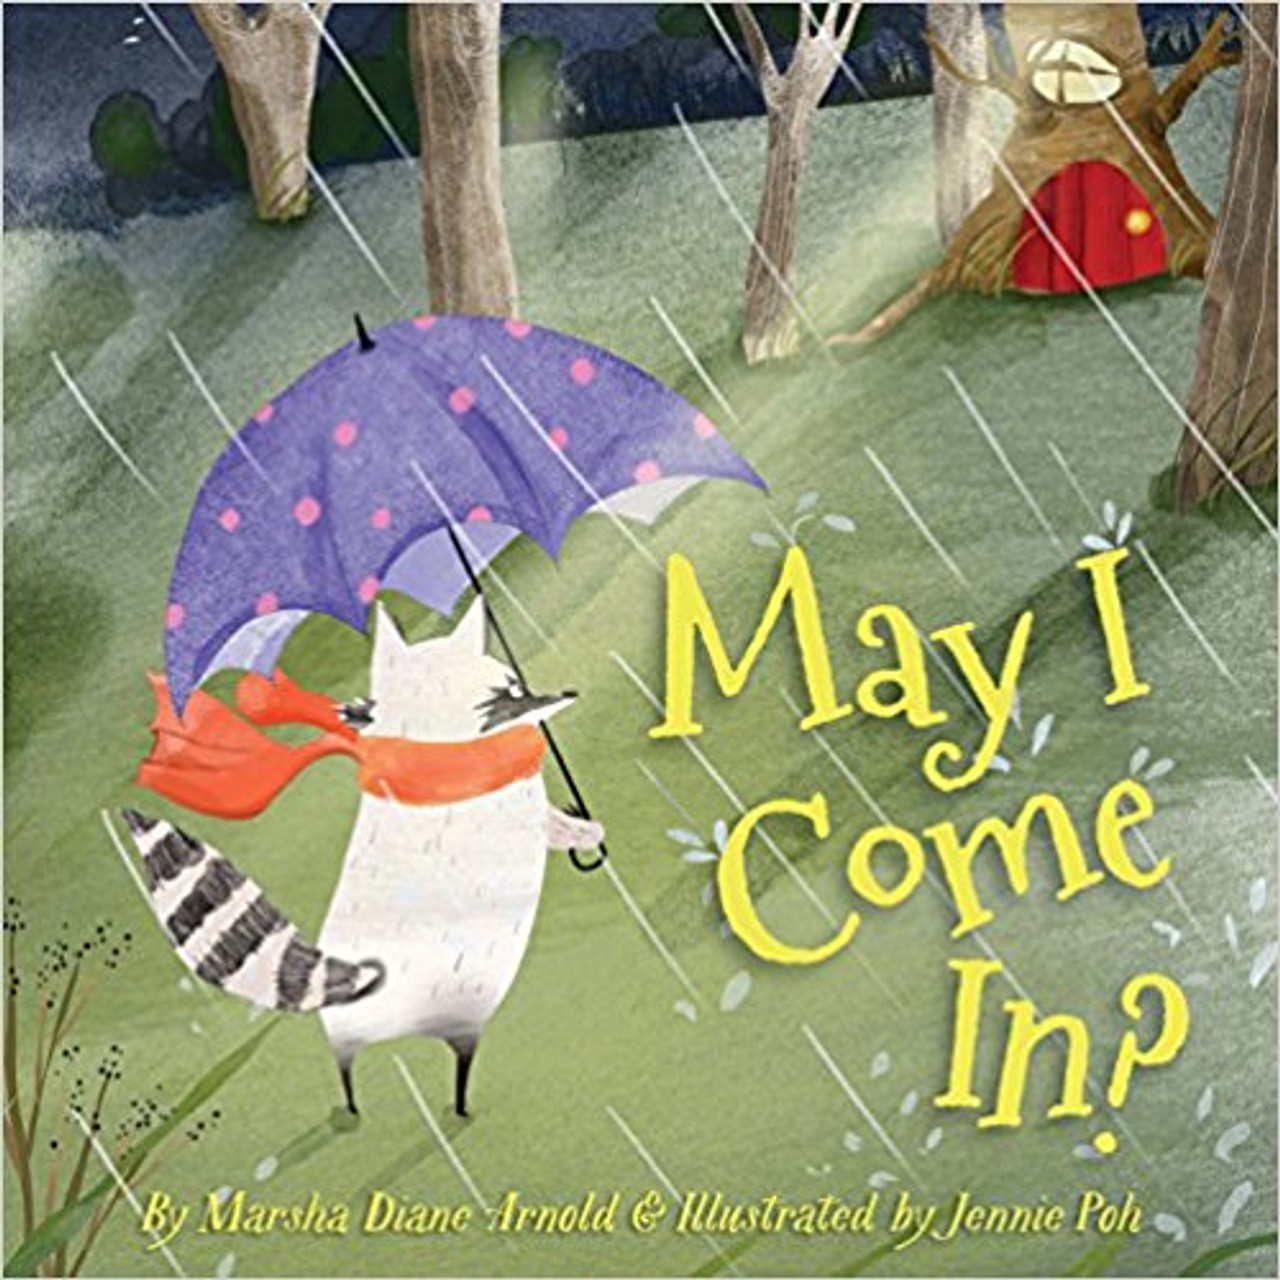 May I Come In? by Marsha Diane Arnold